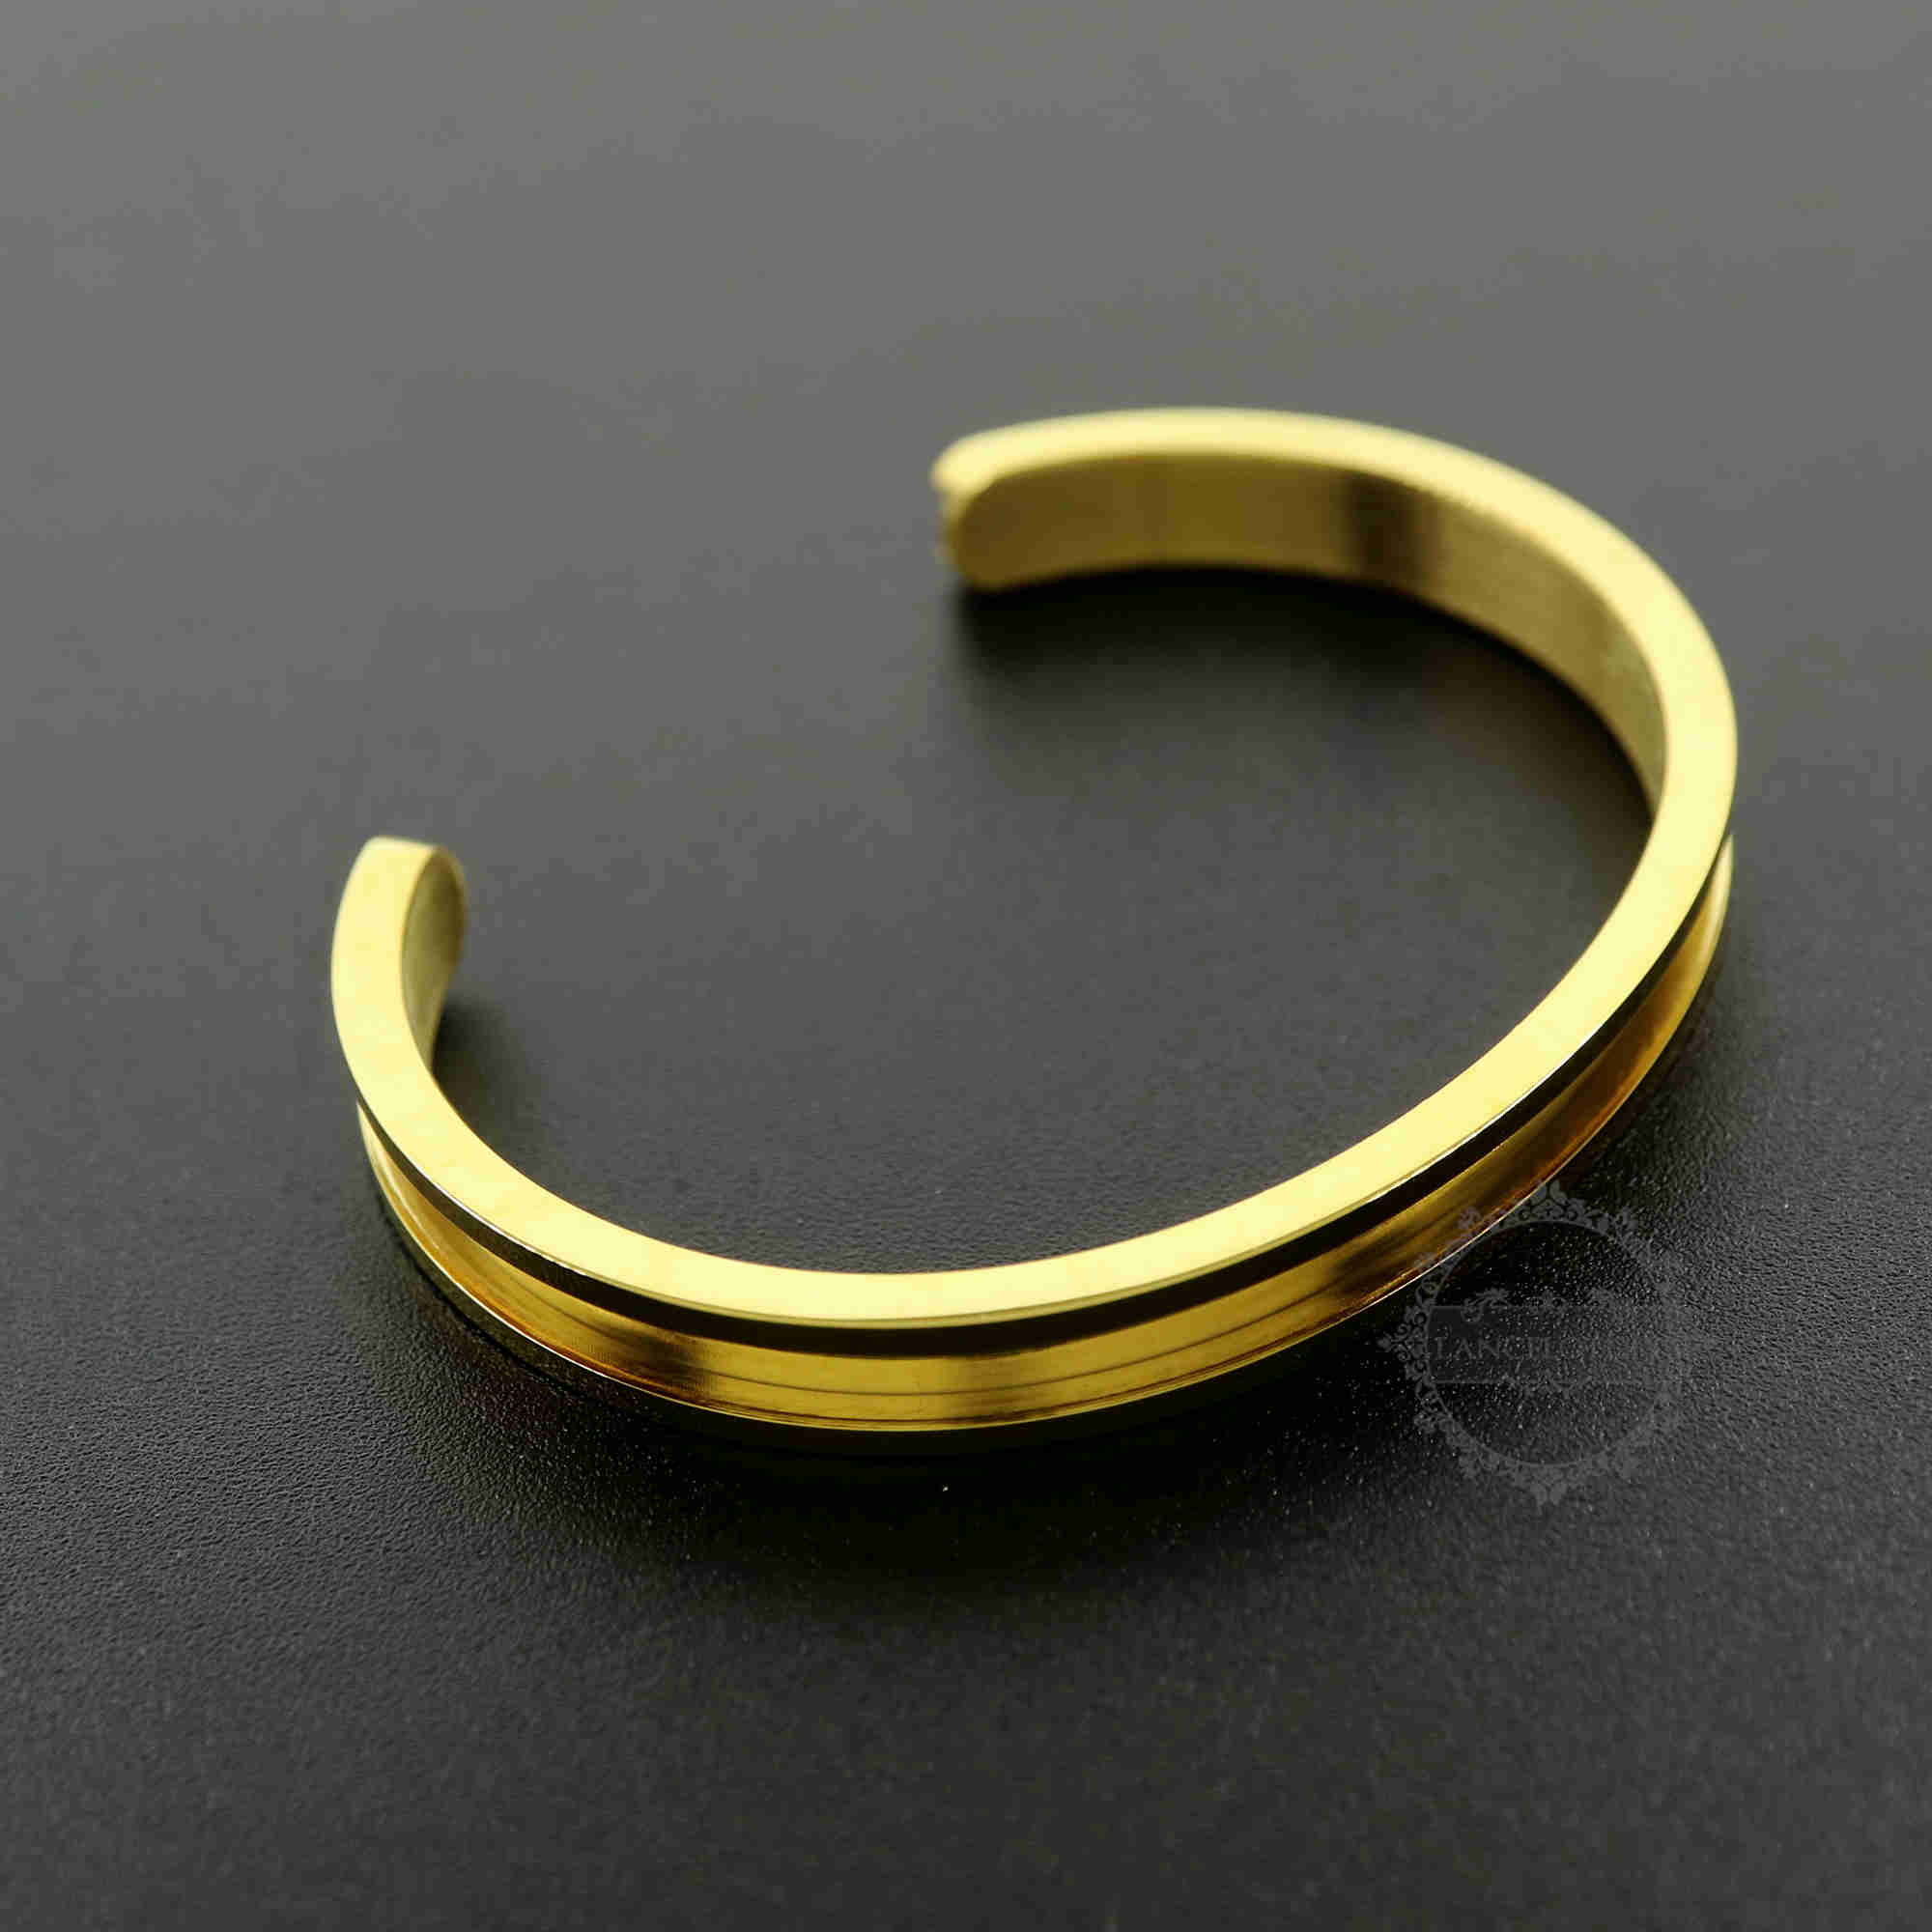 1Pcs 7x57MM Silver,Gold,Rose Gold Stainless Steel Bracelet Bangle with 4MM Width 1.5MM Depth Bezel DIY Supplies 1900175 - Click Image to Close